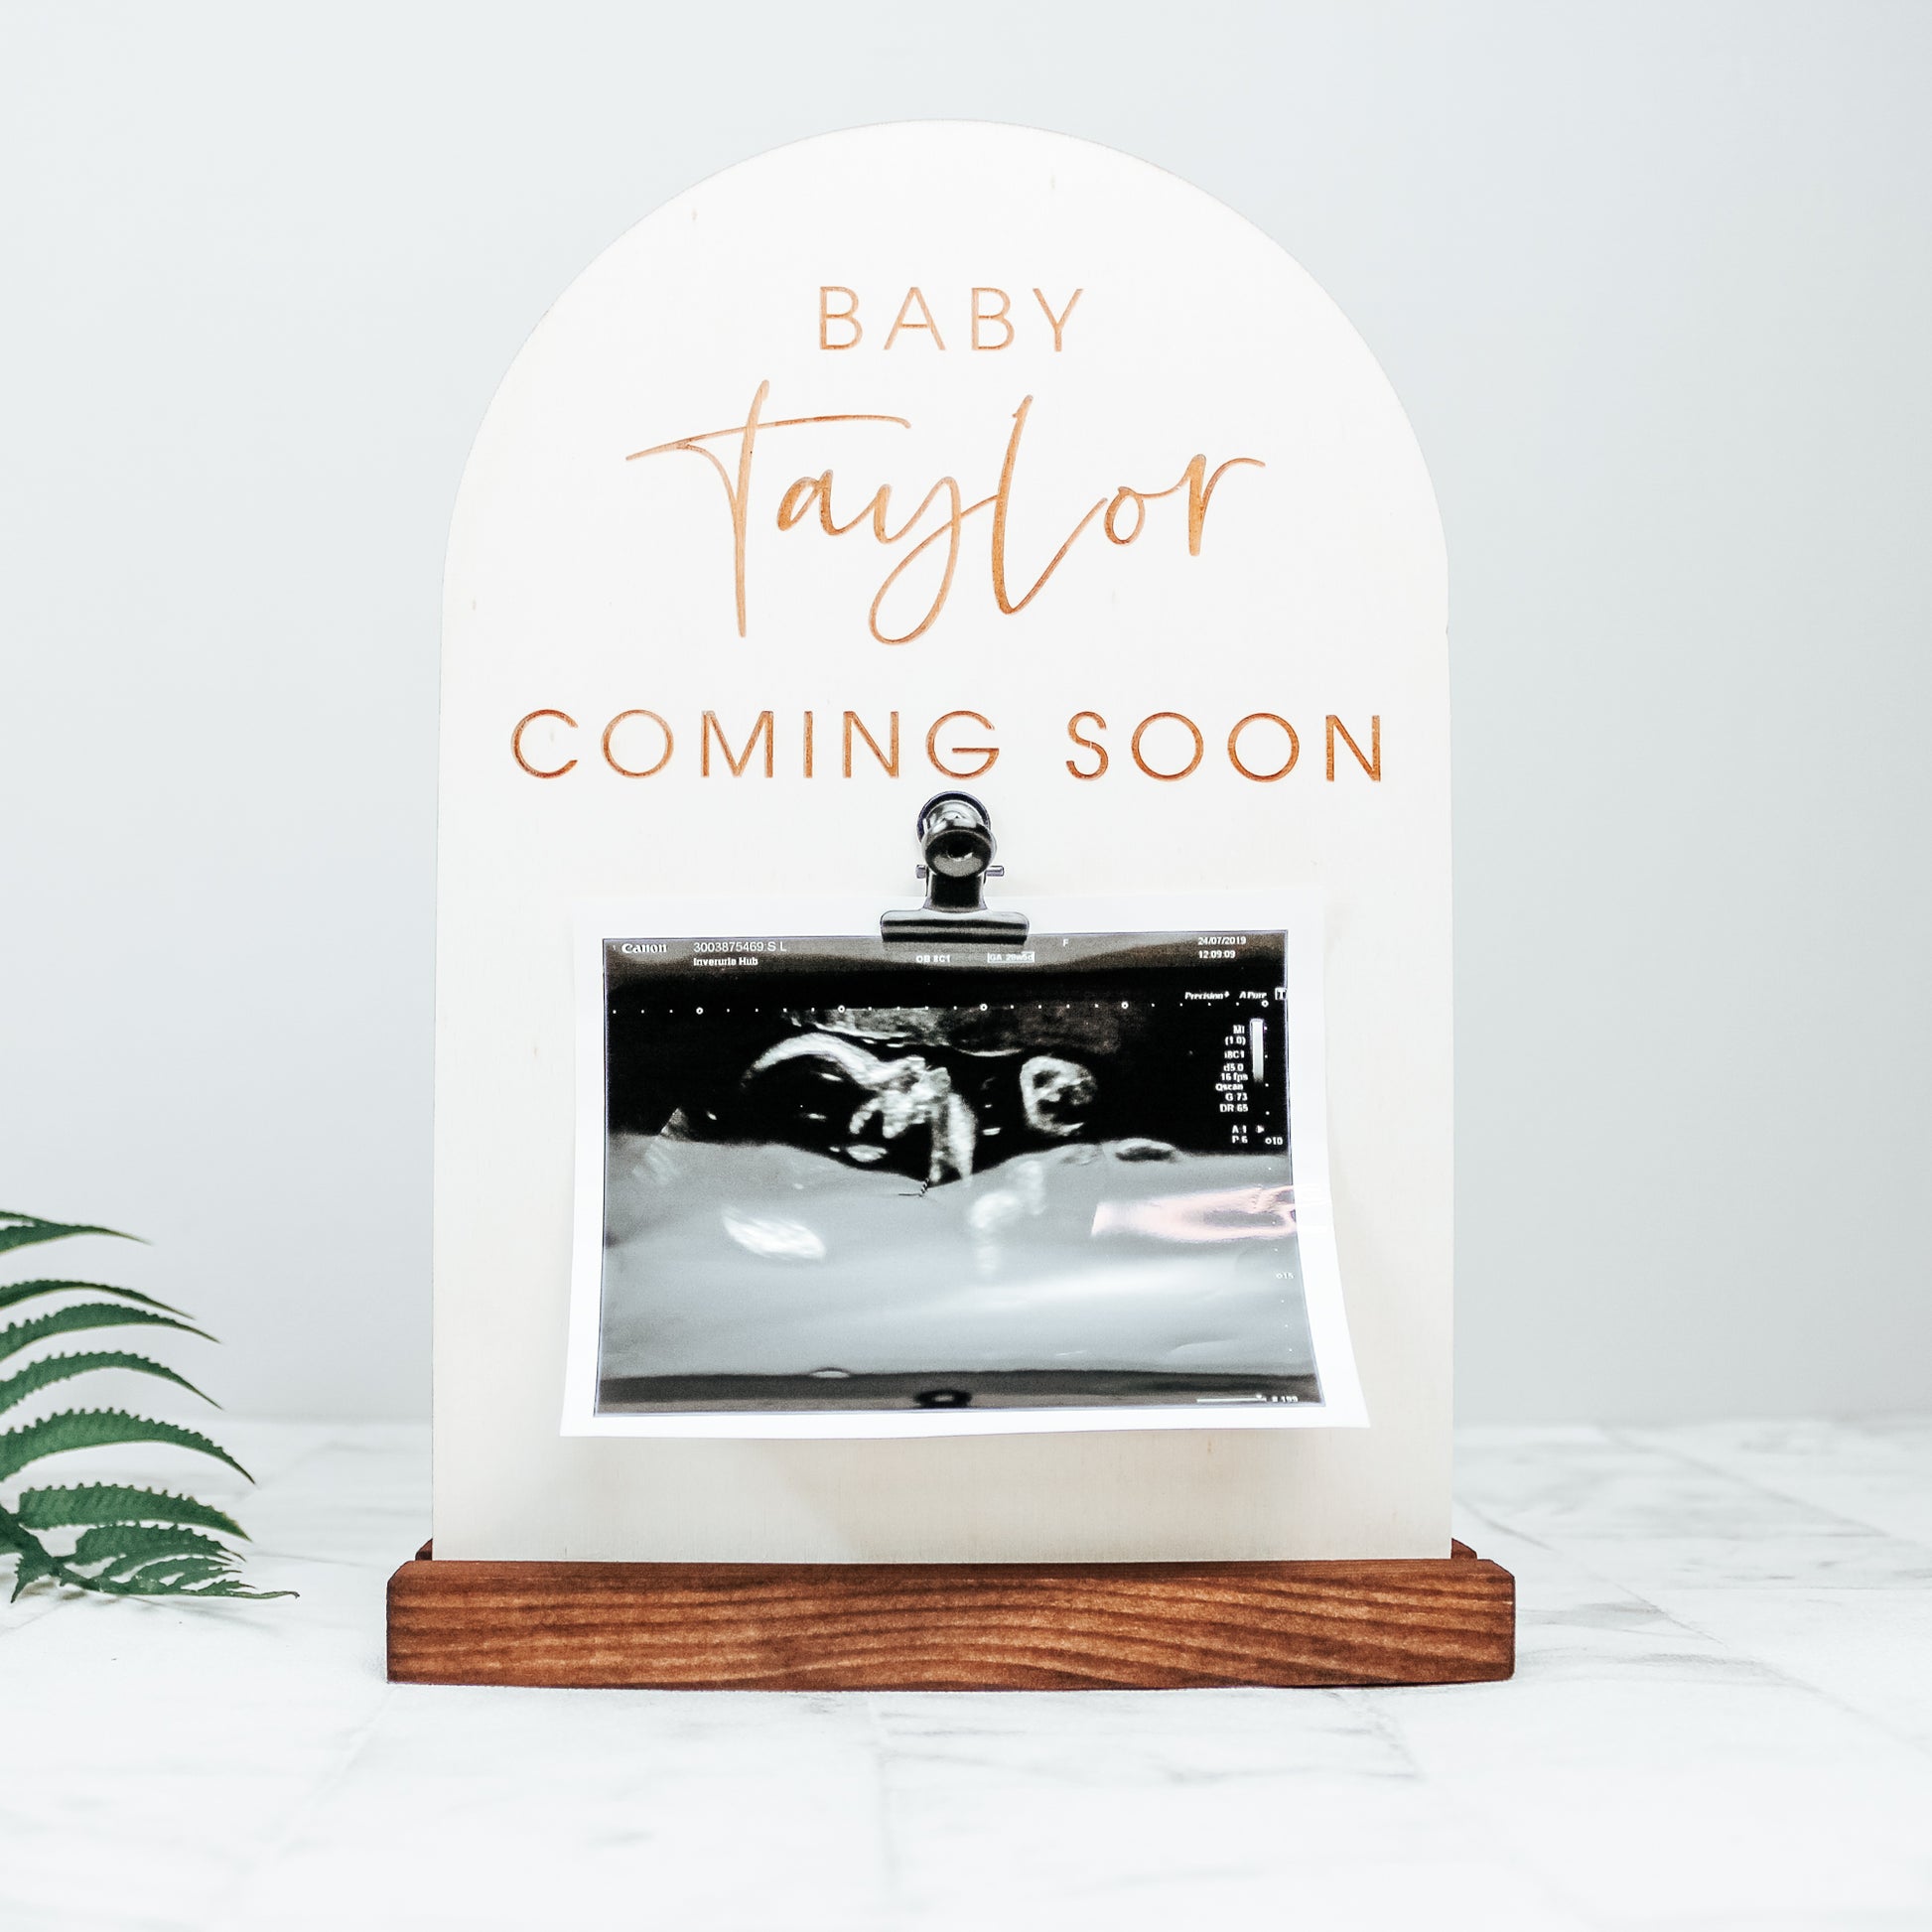 pregnancy announcement sign photo prop for instagram. The sign is wooden and is engraved with baby surname coming soon and has a baby scan picture affixed to to it by a clip